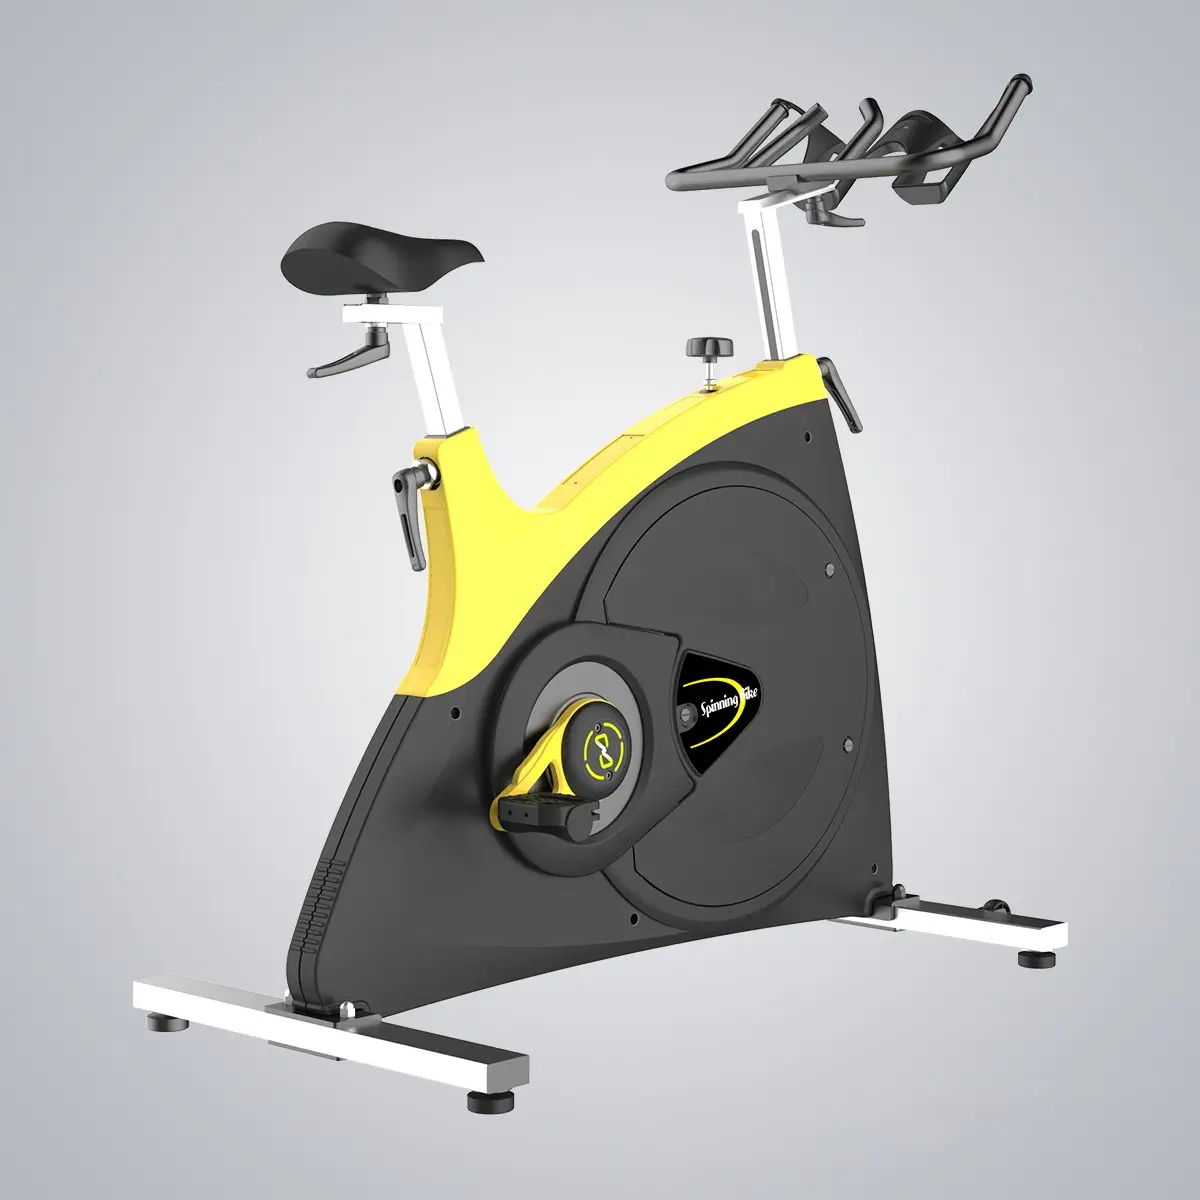 Professional Gym Home Fitness Spinning Bike Equipment Indoor Exercise Use Bicycle D06 Magnetic Spin Bikes For Body Building